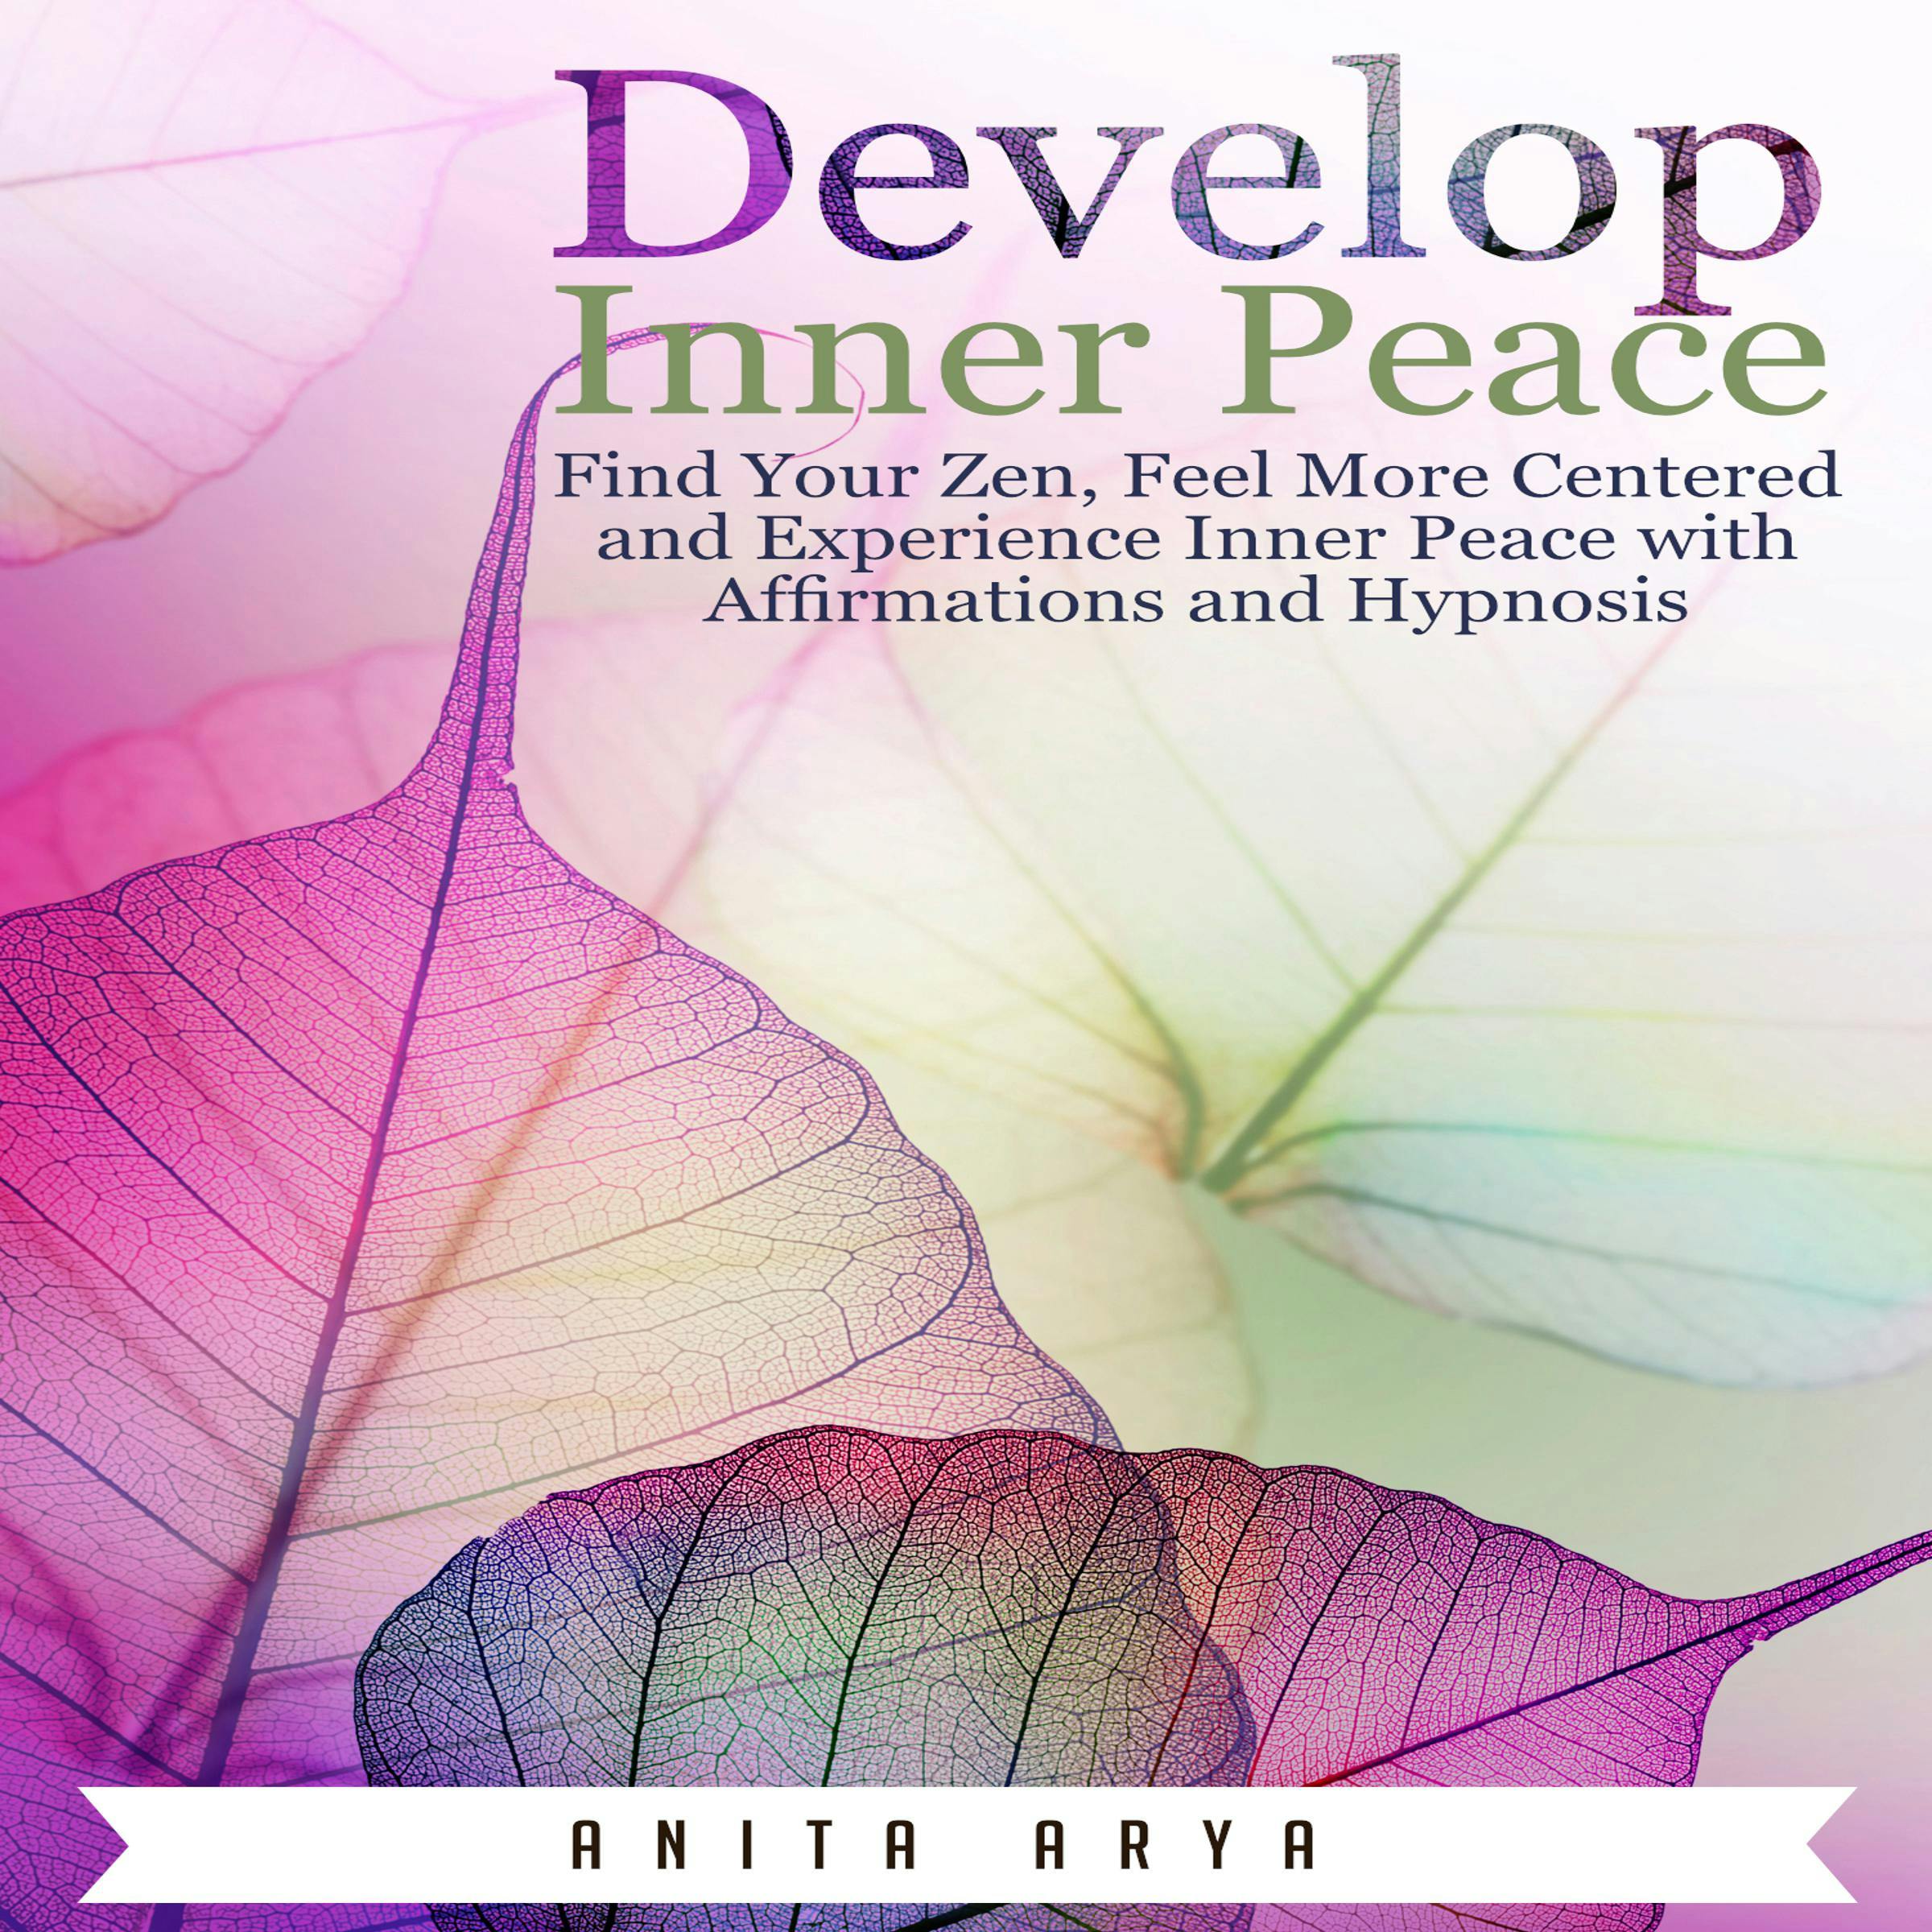 Develop Inner Peace: Find Your Zen, Feel More Centered and Experience Inner Peace with Affirmations and Hypnosis - Anita Arya